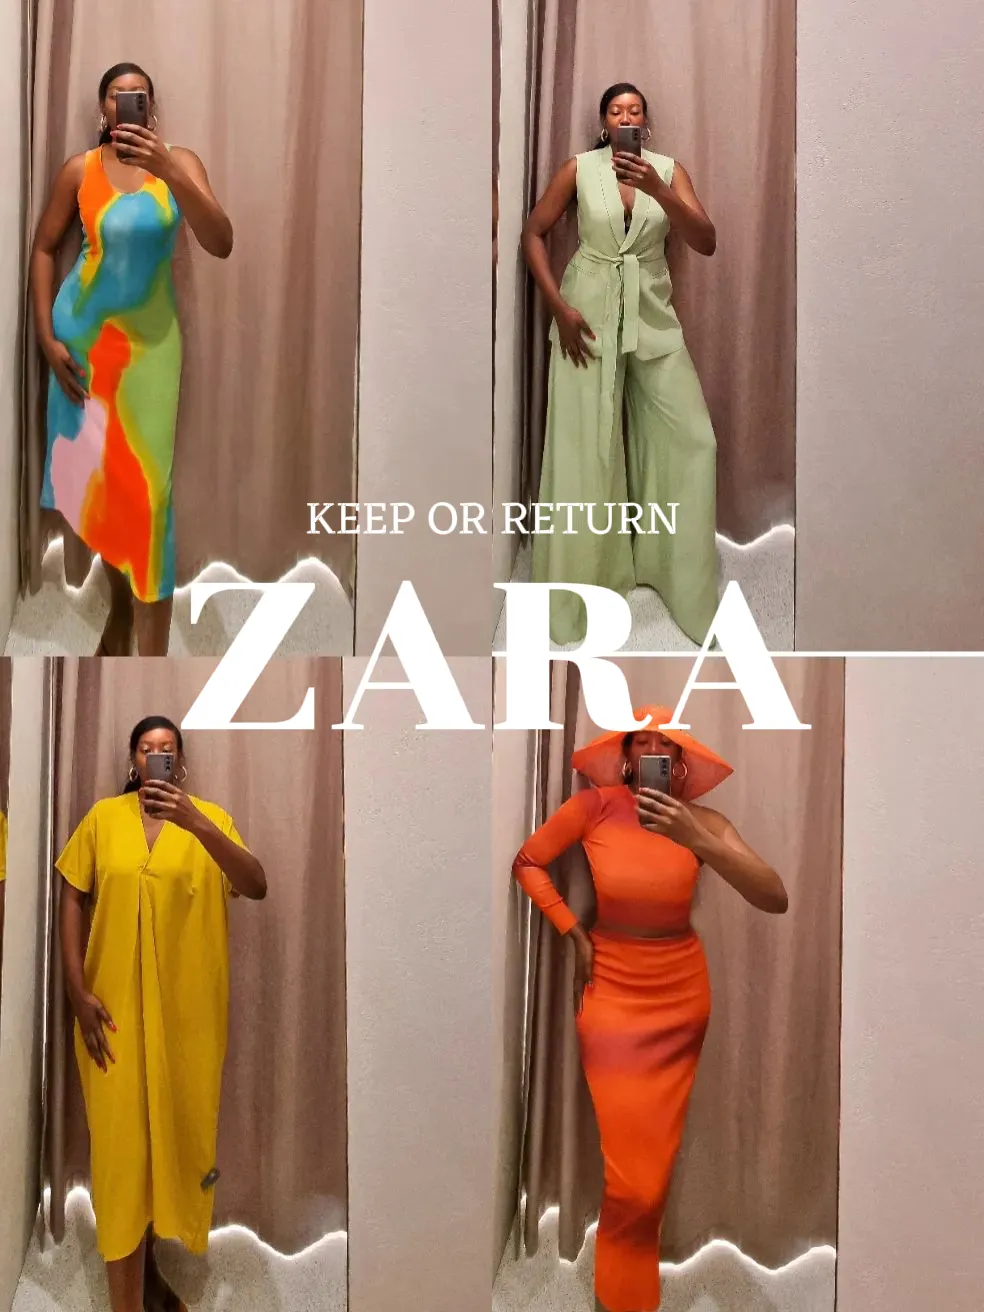 ZARA TRY ON - KEEP OR RETURN?, Gallery posted by sarahs_rails